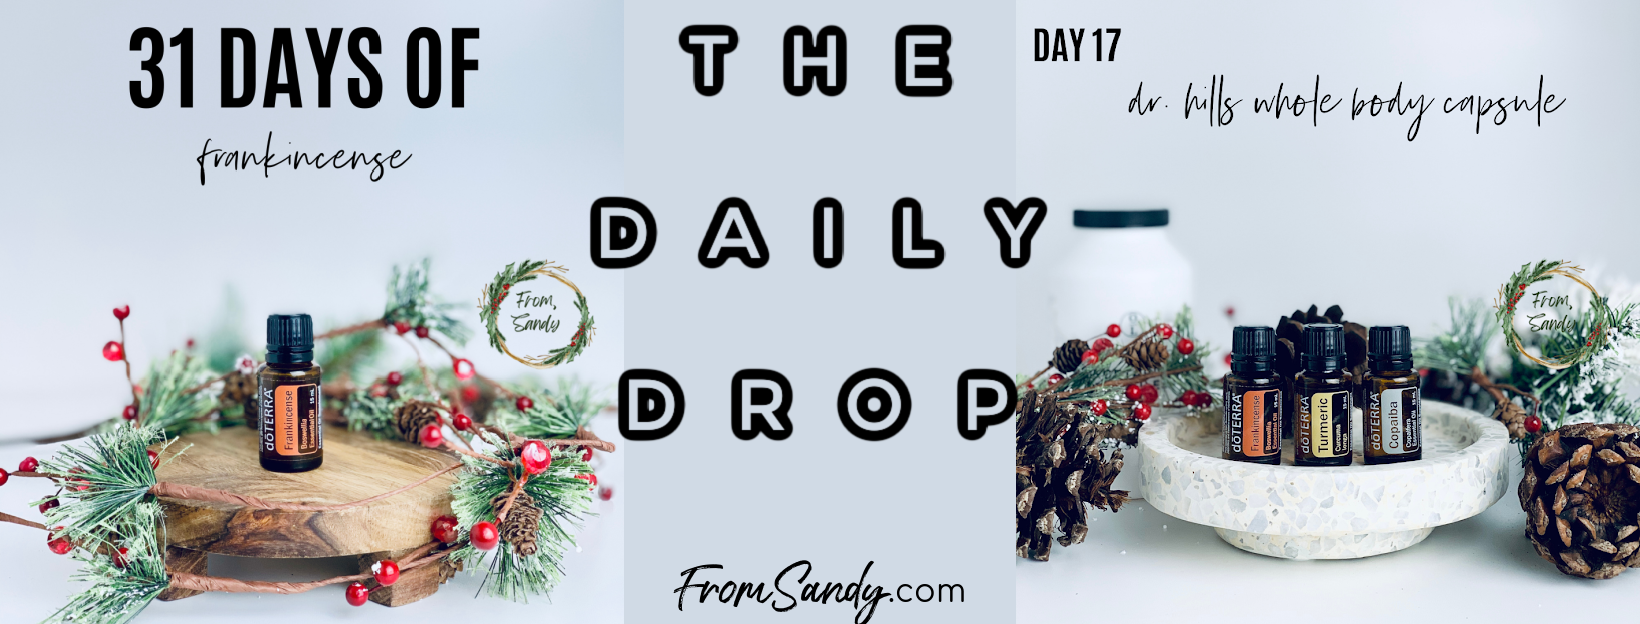 Dr. Hill's Whole Body Capsule (31 Days of Frankincense: Day 17), From Sandy